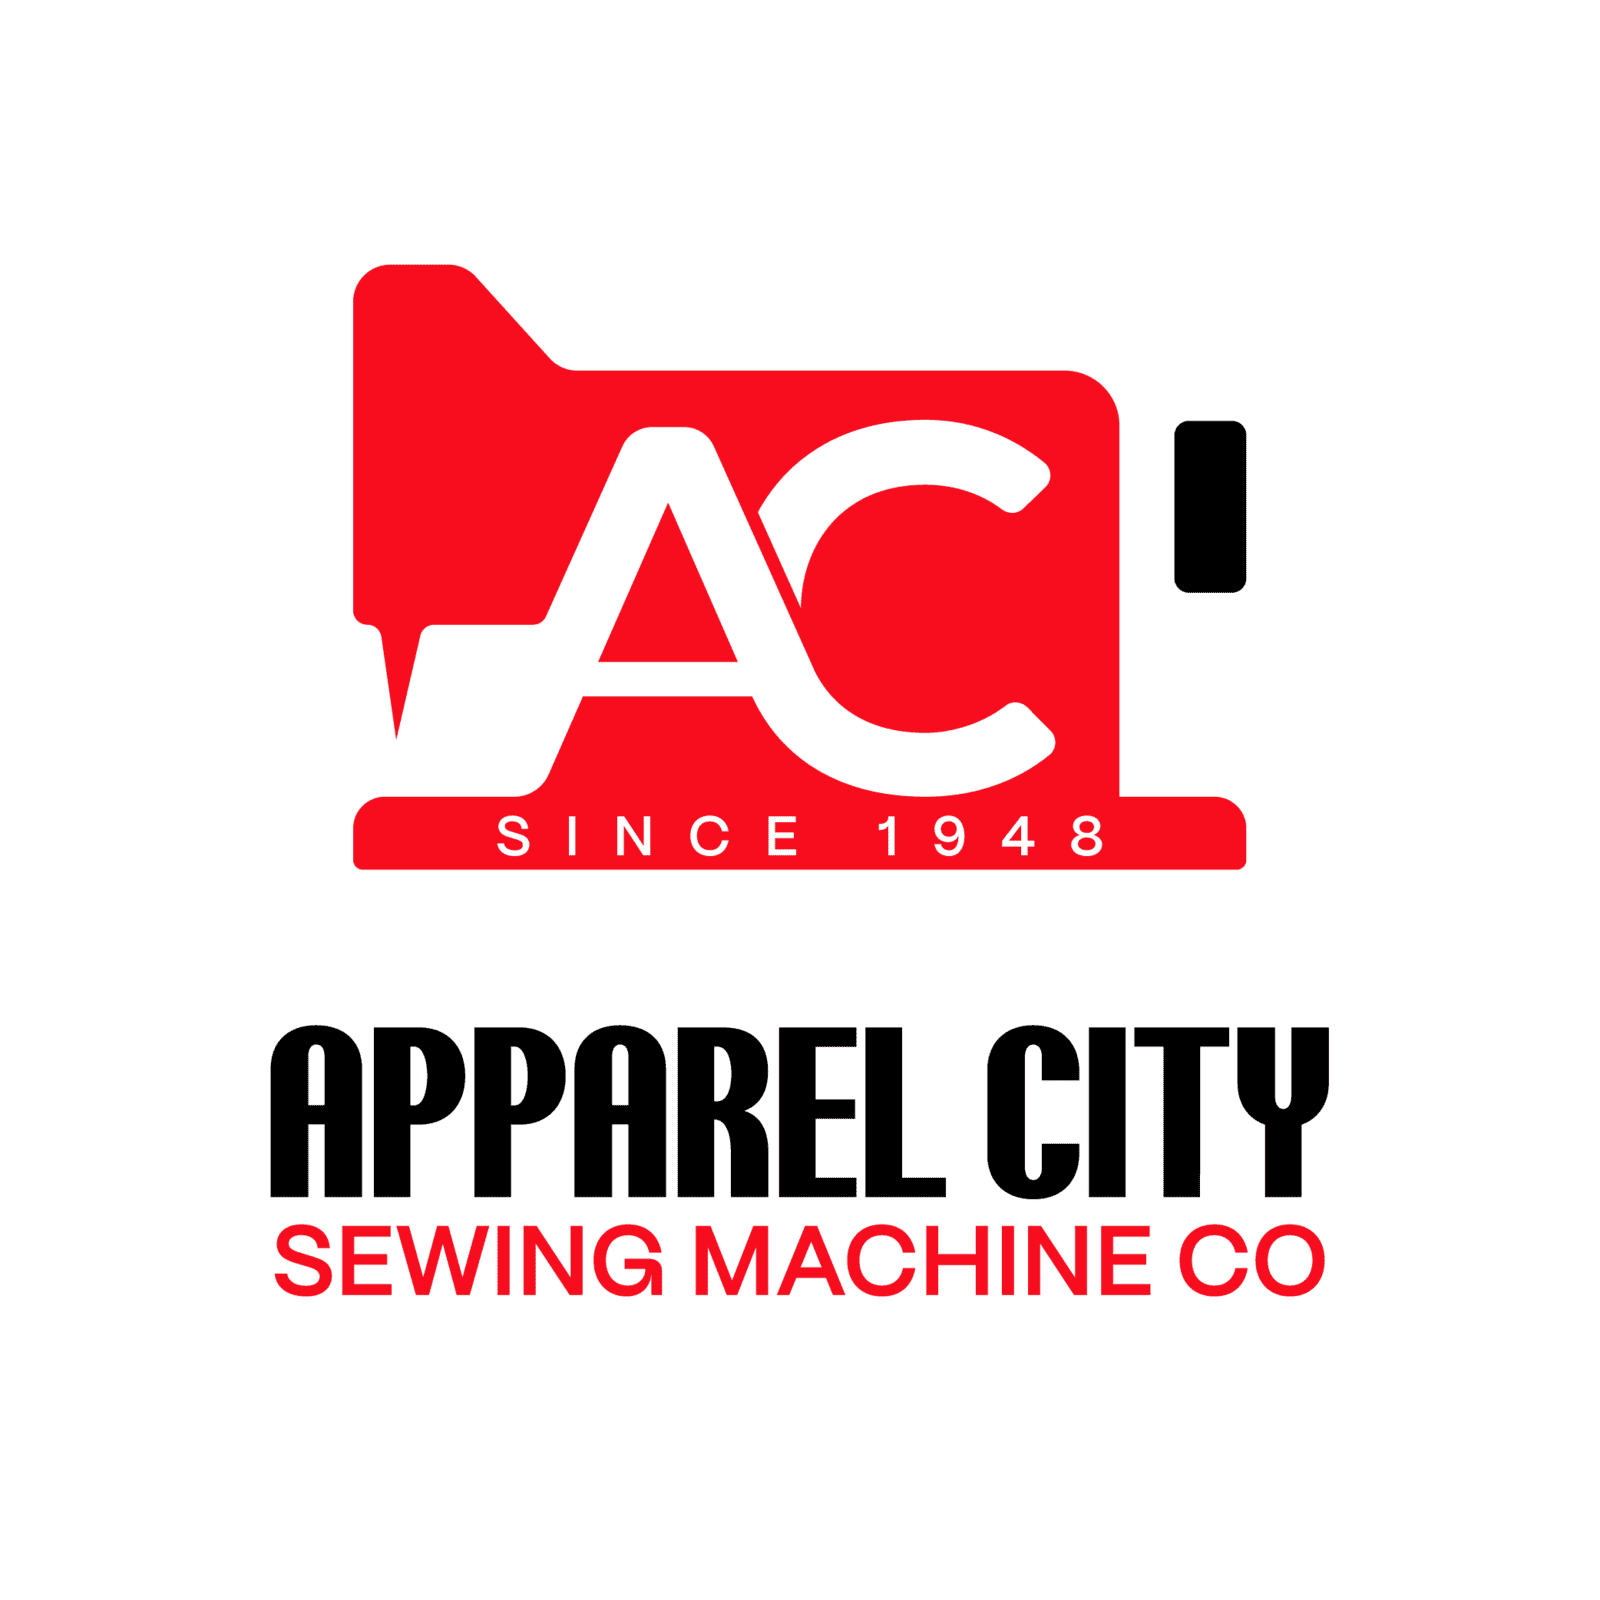 Apparel City Sewing Machine Co.